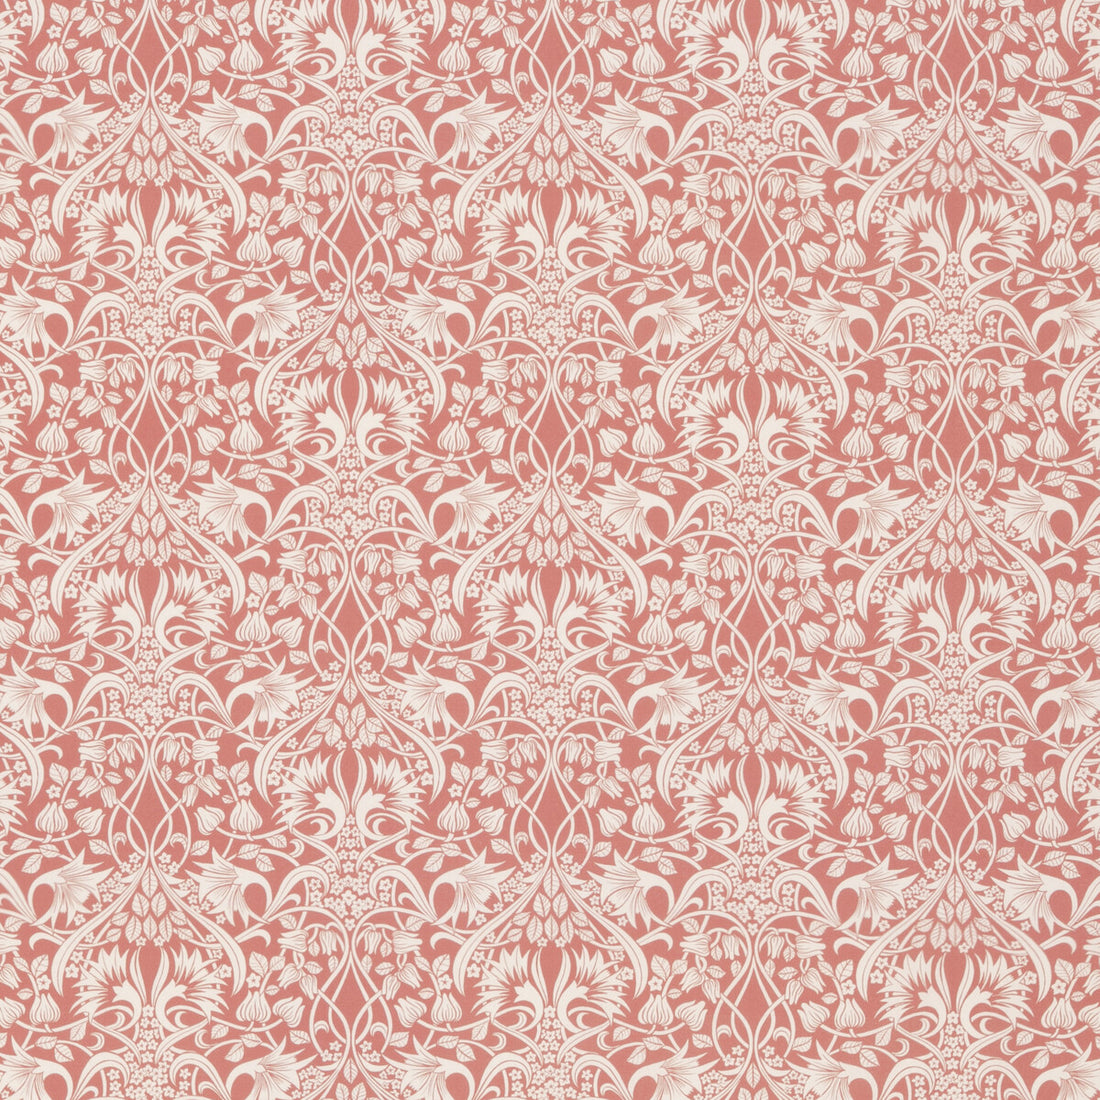 Fritillerie Cotton fabric in coral color - pattern BP10974.1.0 - by G P &amp; J Baker in the Original Brantwood Fabric collection